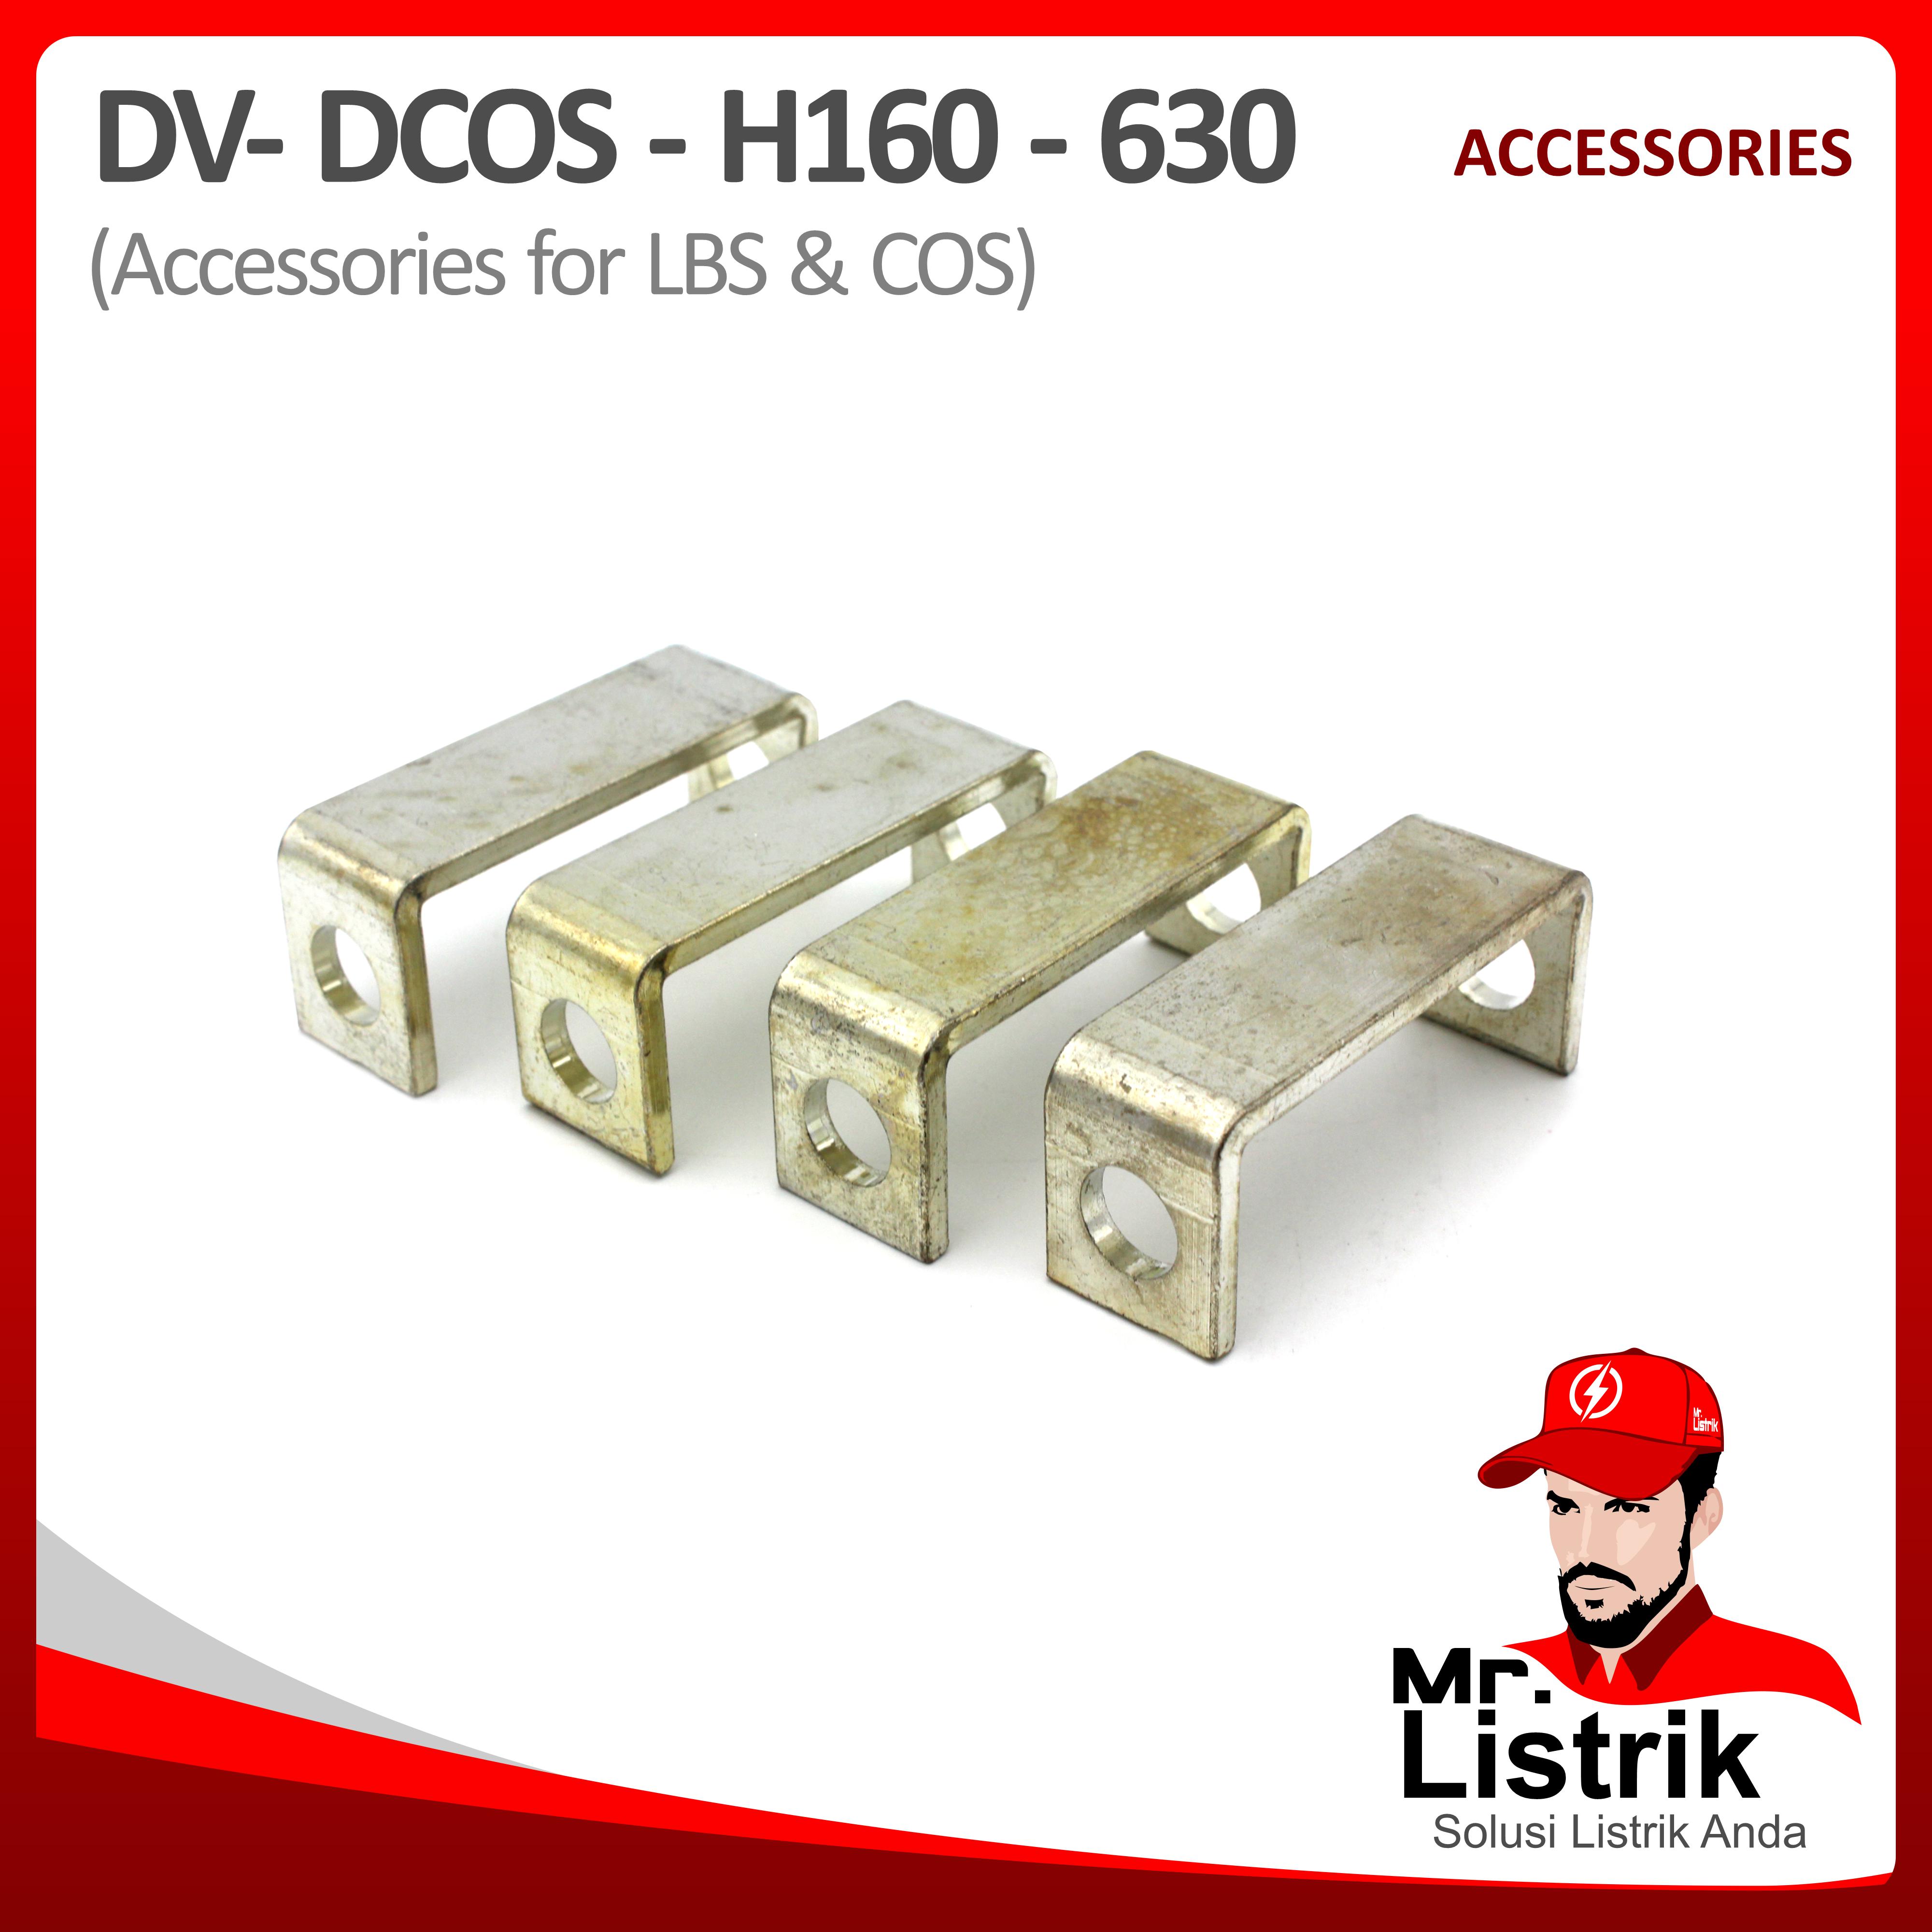 Extention Shaft + Handle Out Door for COS DV DCOS-H160-630